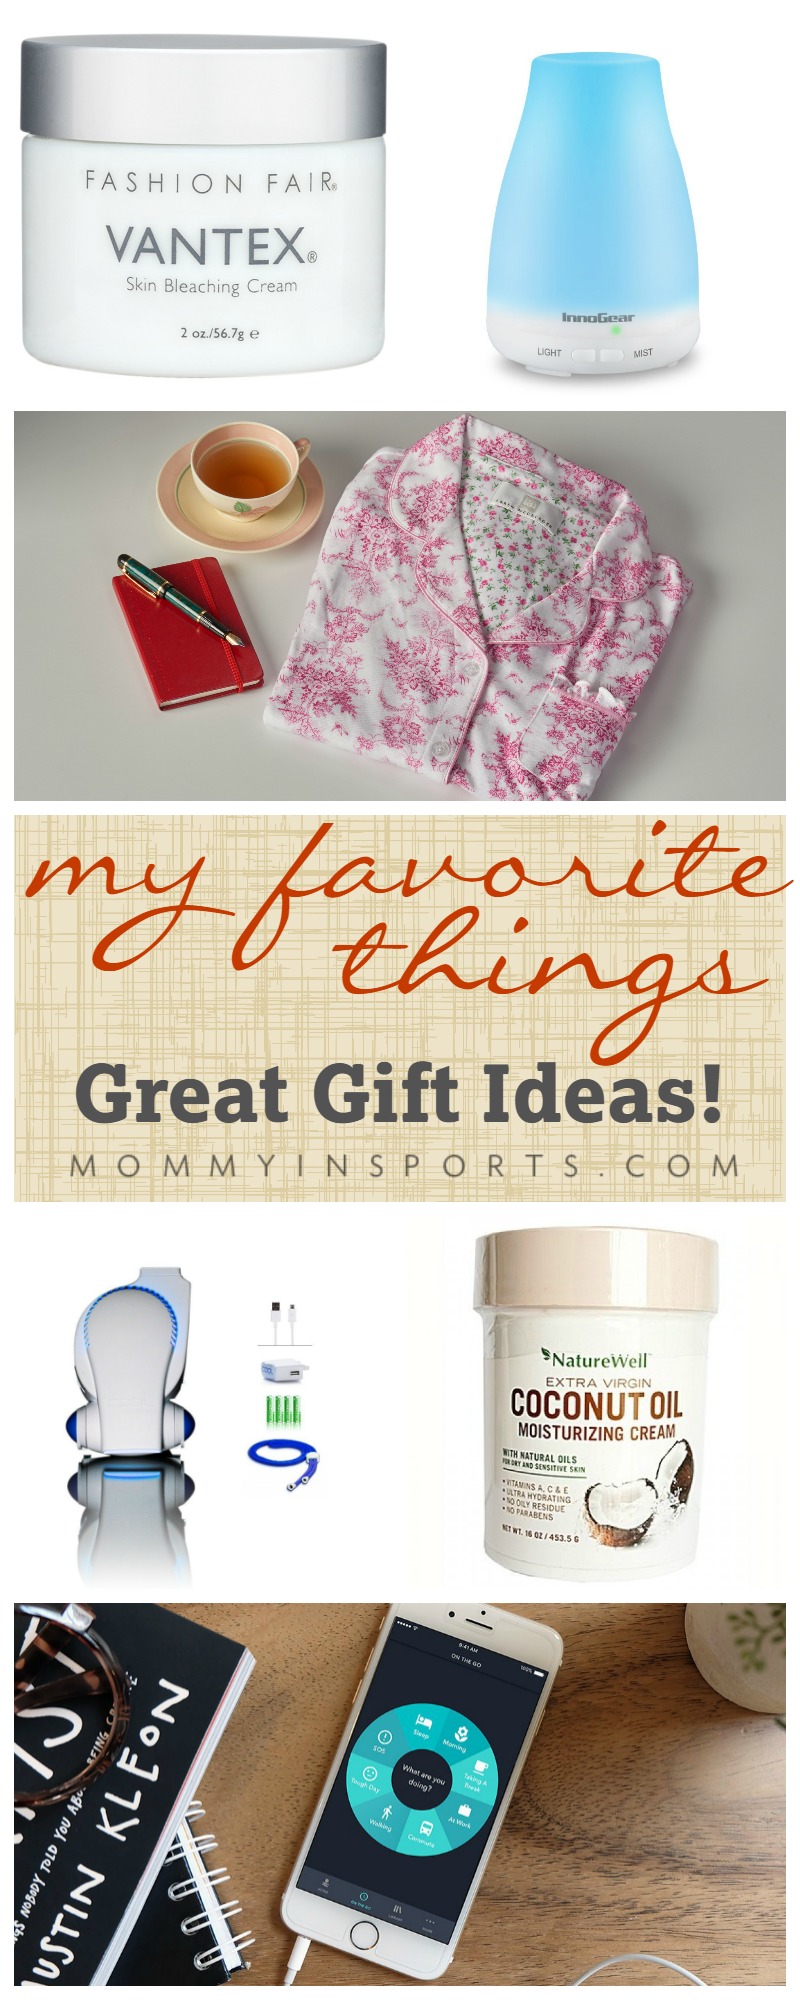 Sometimes you find products you love that you can't wait to share! These are my favorite things lately, and most would make GREAT gift ideas!